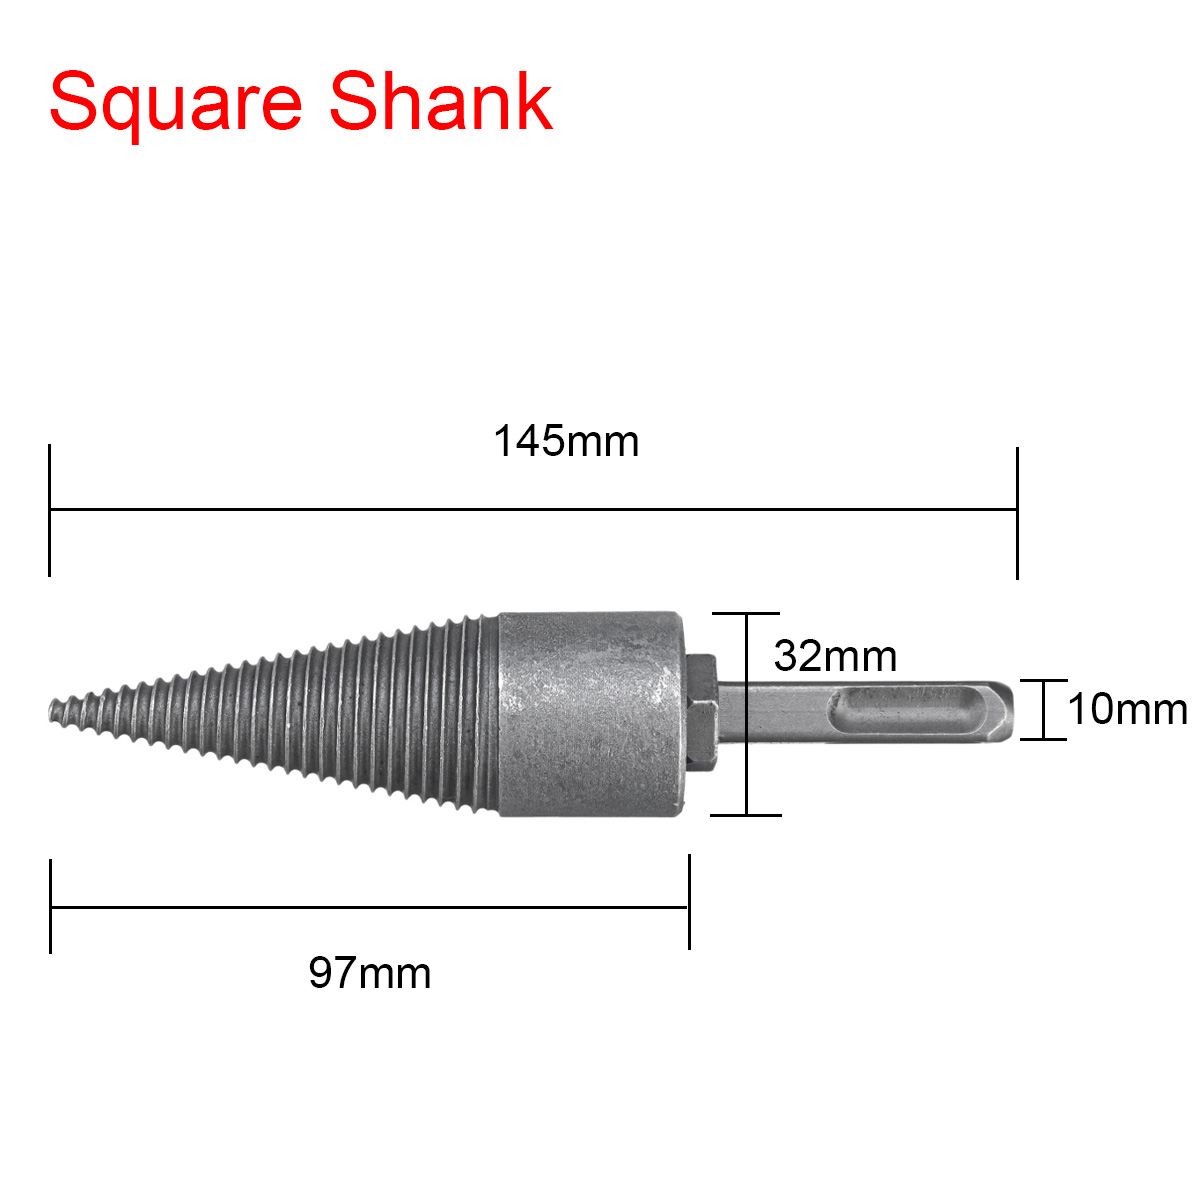 5-PCS-42mm32mm-Firewood-Splitter-Drill-RoundHexTriangleWrench-Shank-Wood-Cone-Reamer-Punch-Driver-St-1962068-13